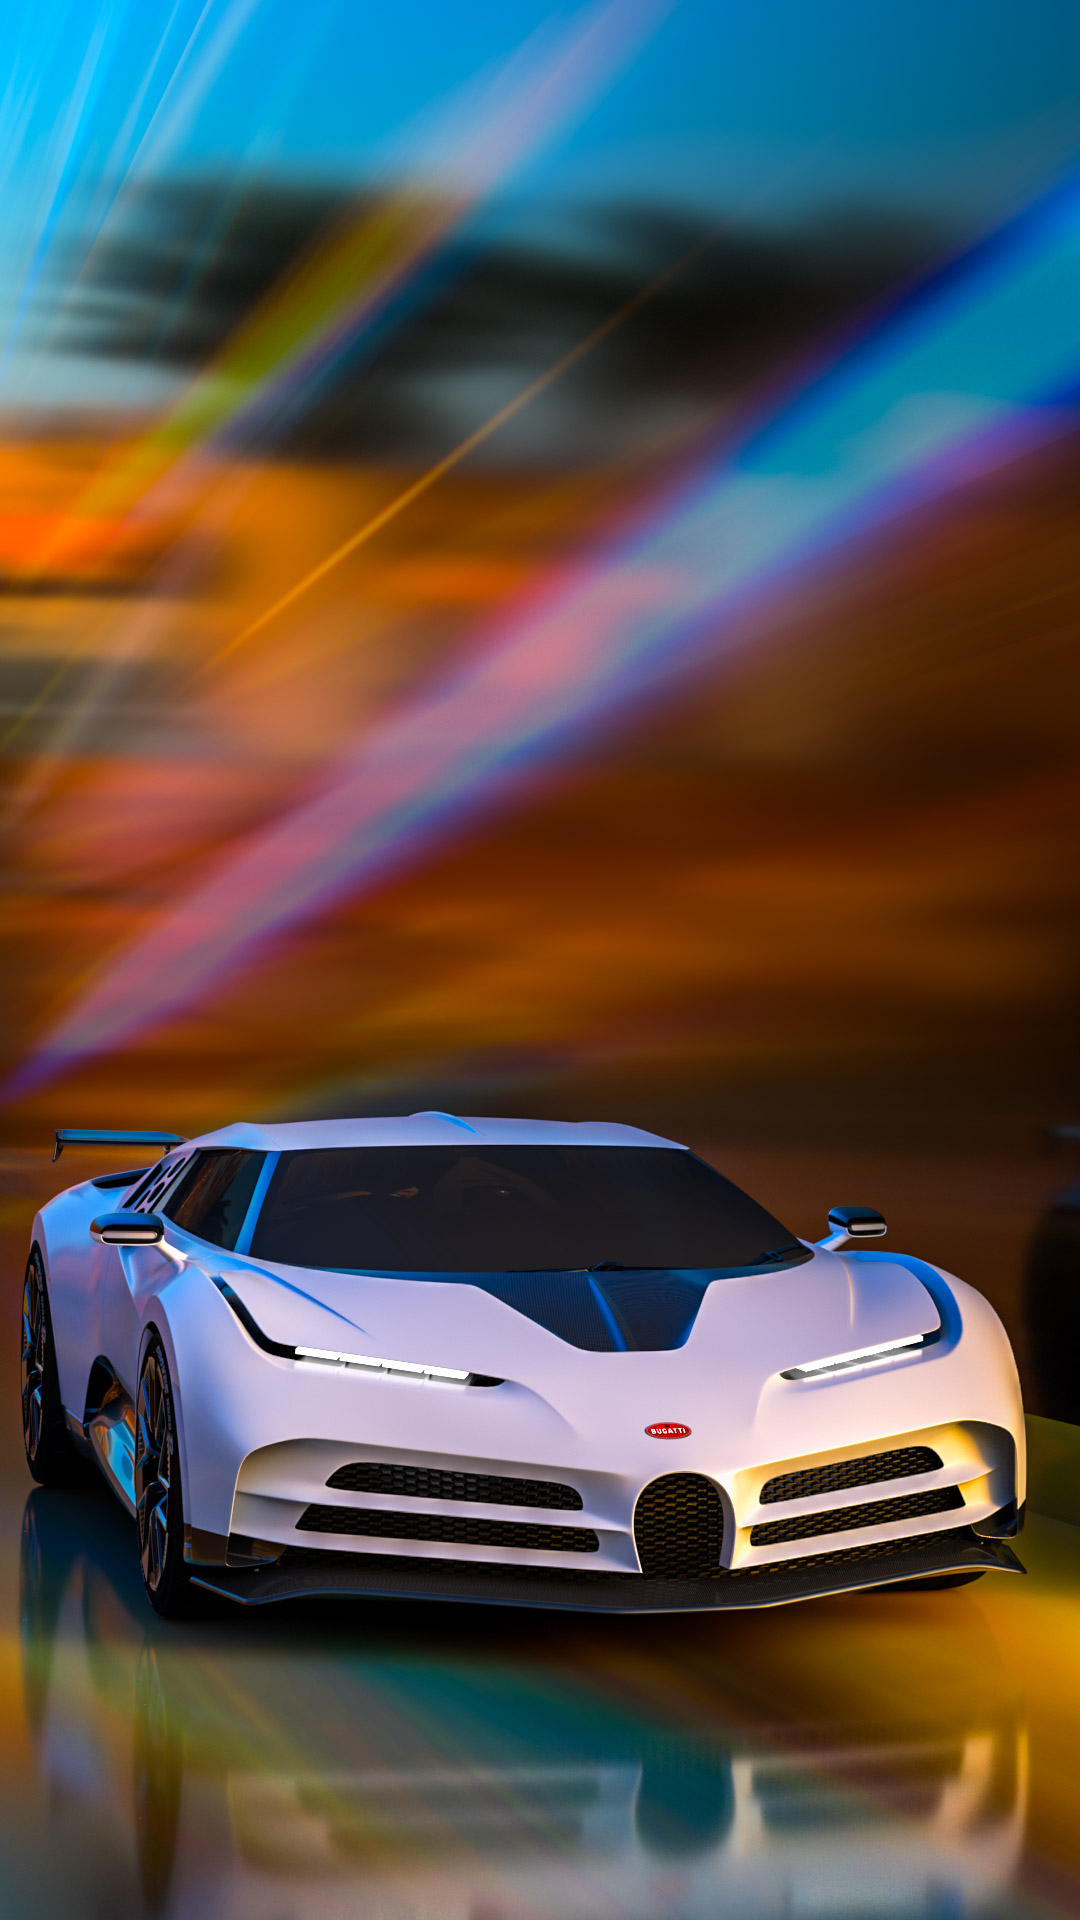 Experience the thrill of speed with our full HD wallpaper featuring the Bugatti Centodieci supercar, a testament to French engineering and luxury.